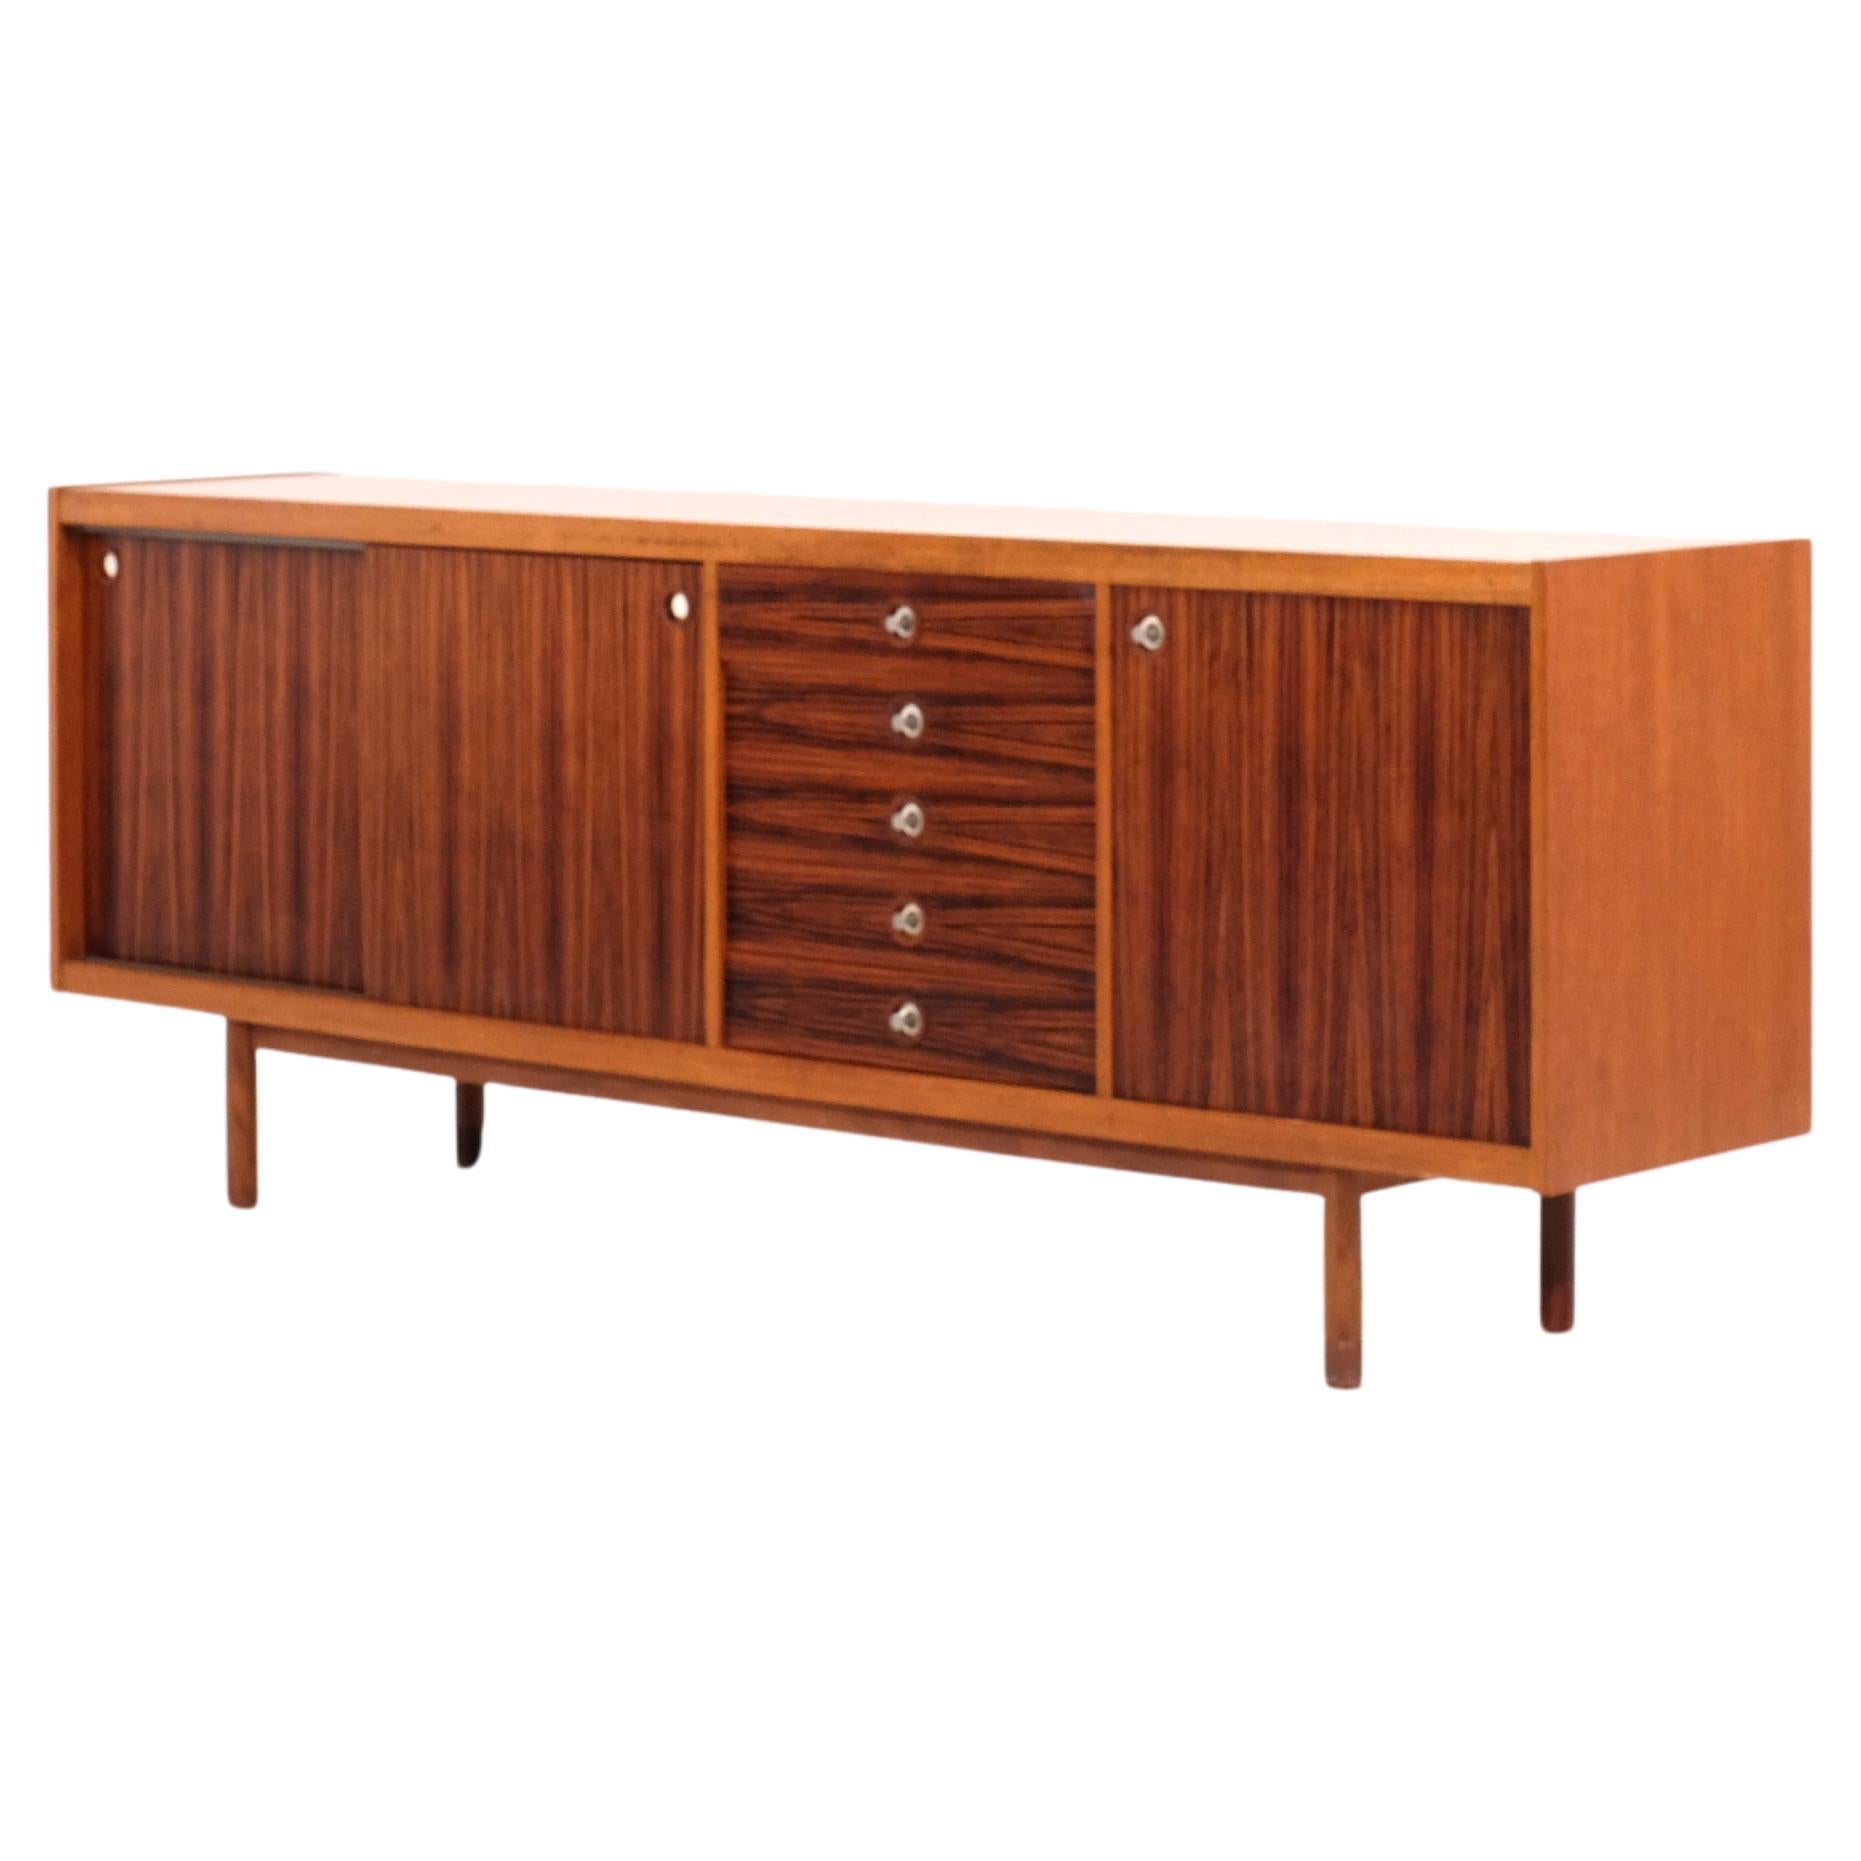 Sideboard by George Coslin - 1950s For Sale